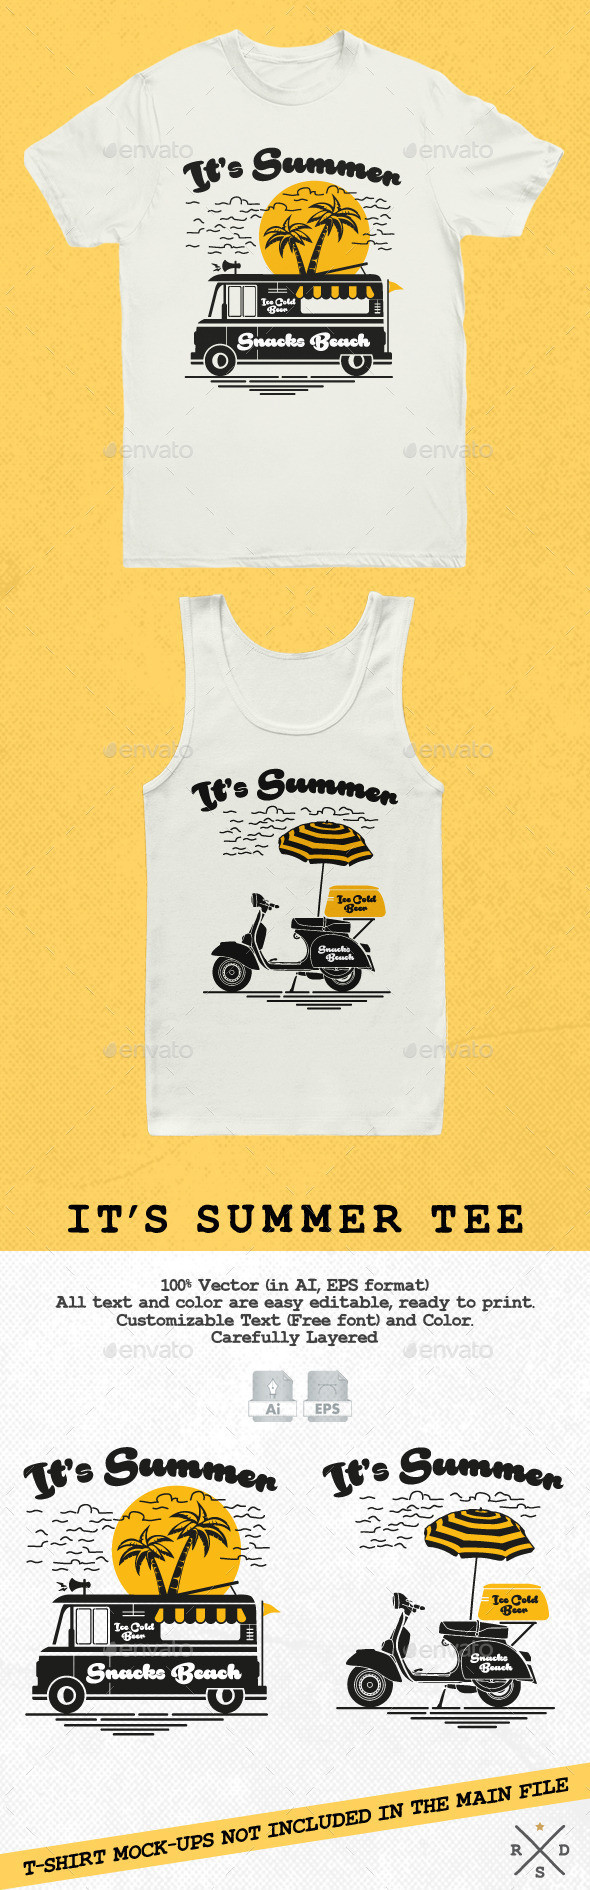 Its 20summer 20tee image 20preview